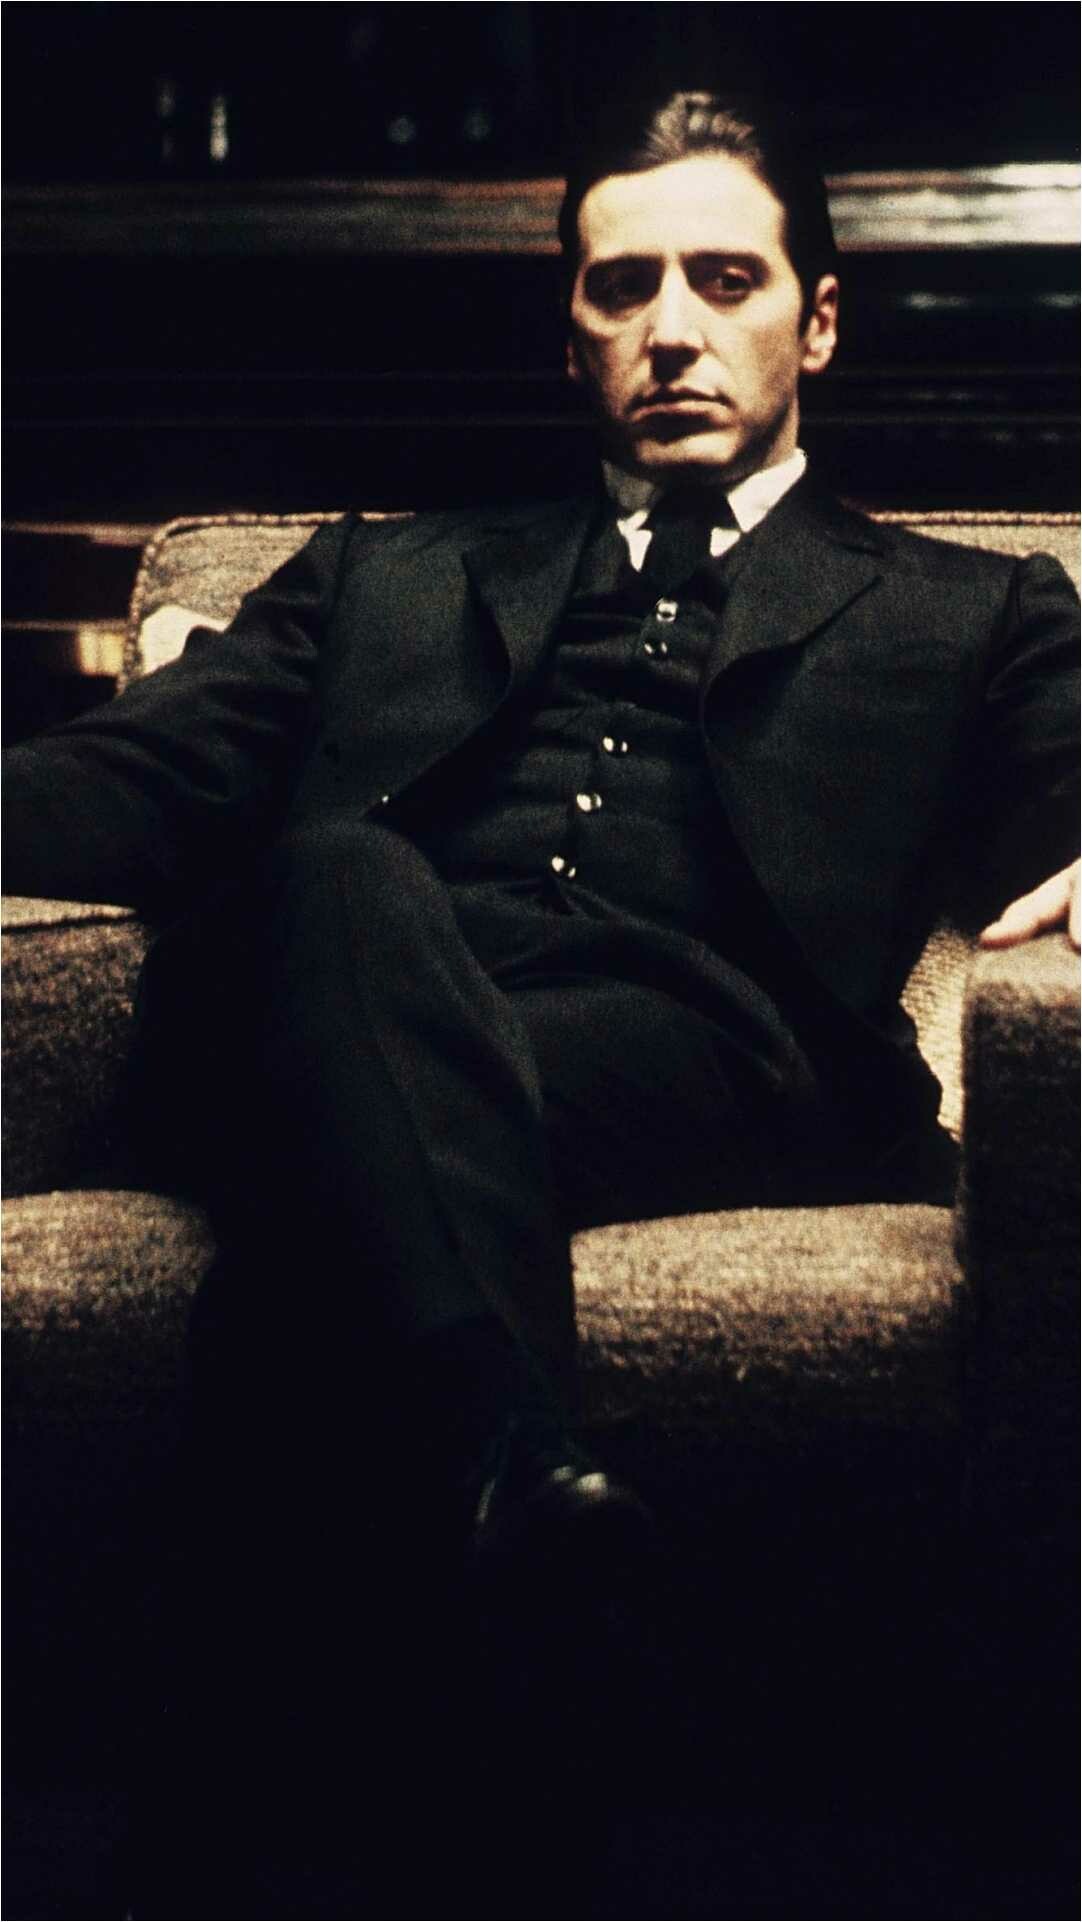 The Godfather: The film focuses on the transformation of Michael Corleone from reluctant family outsider to ruthless mafia boss. 1090x1930 HD Background.